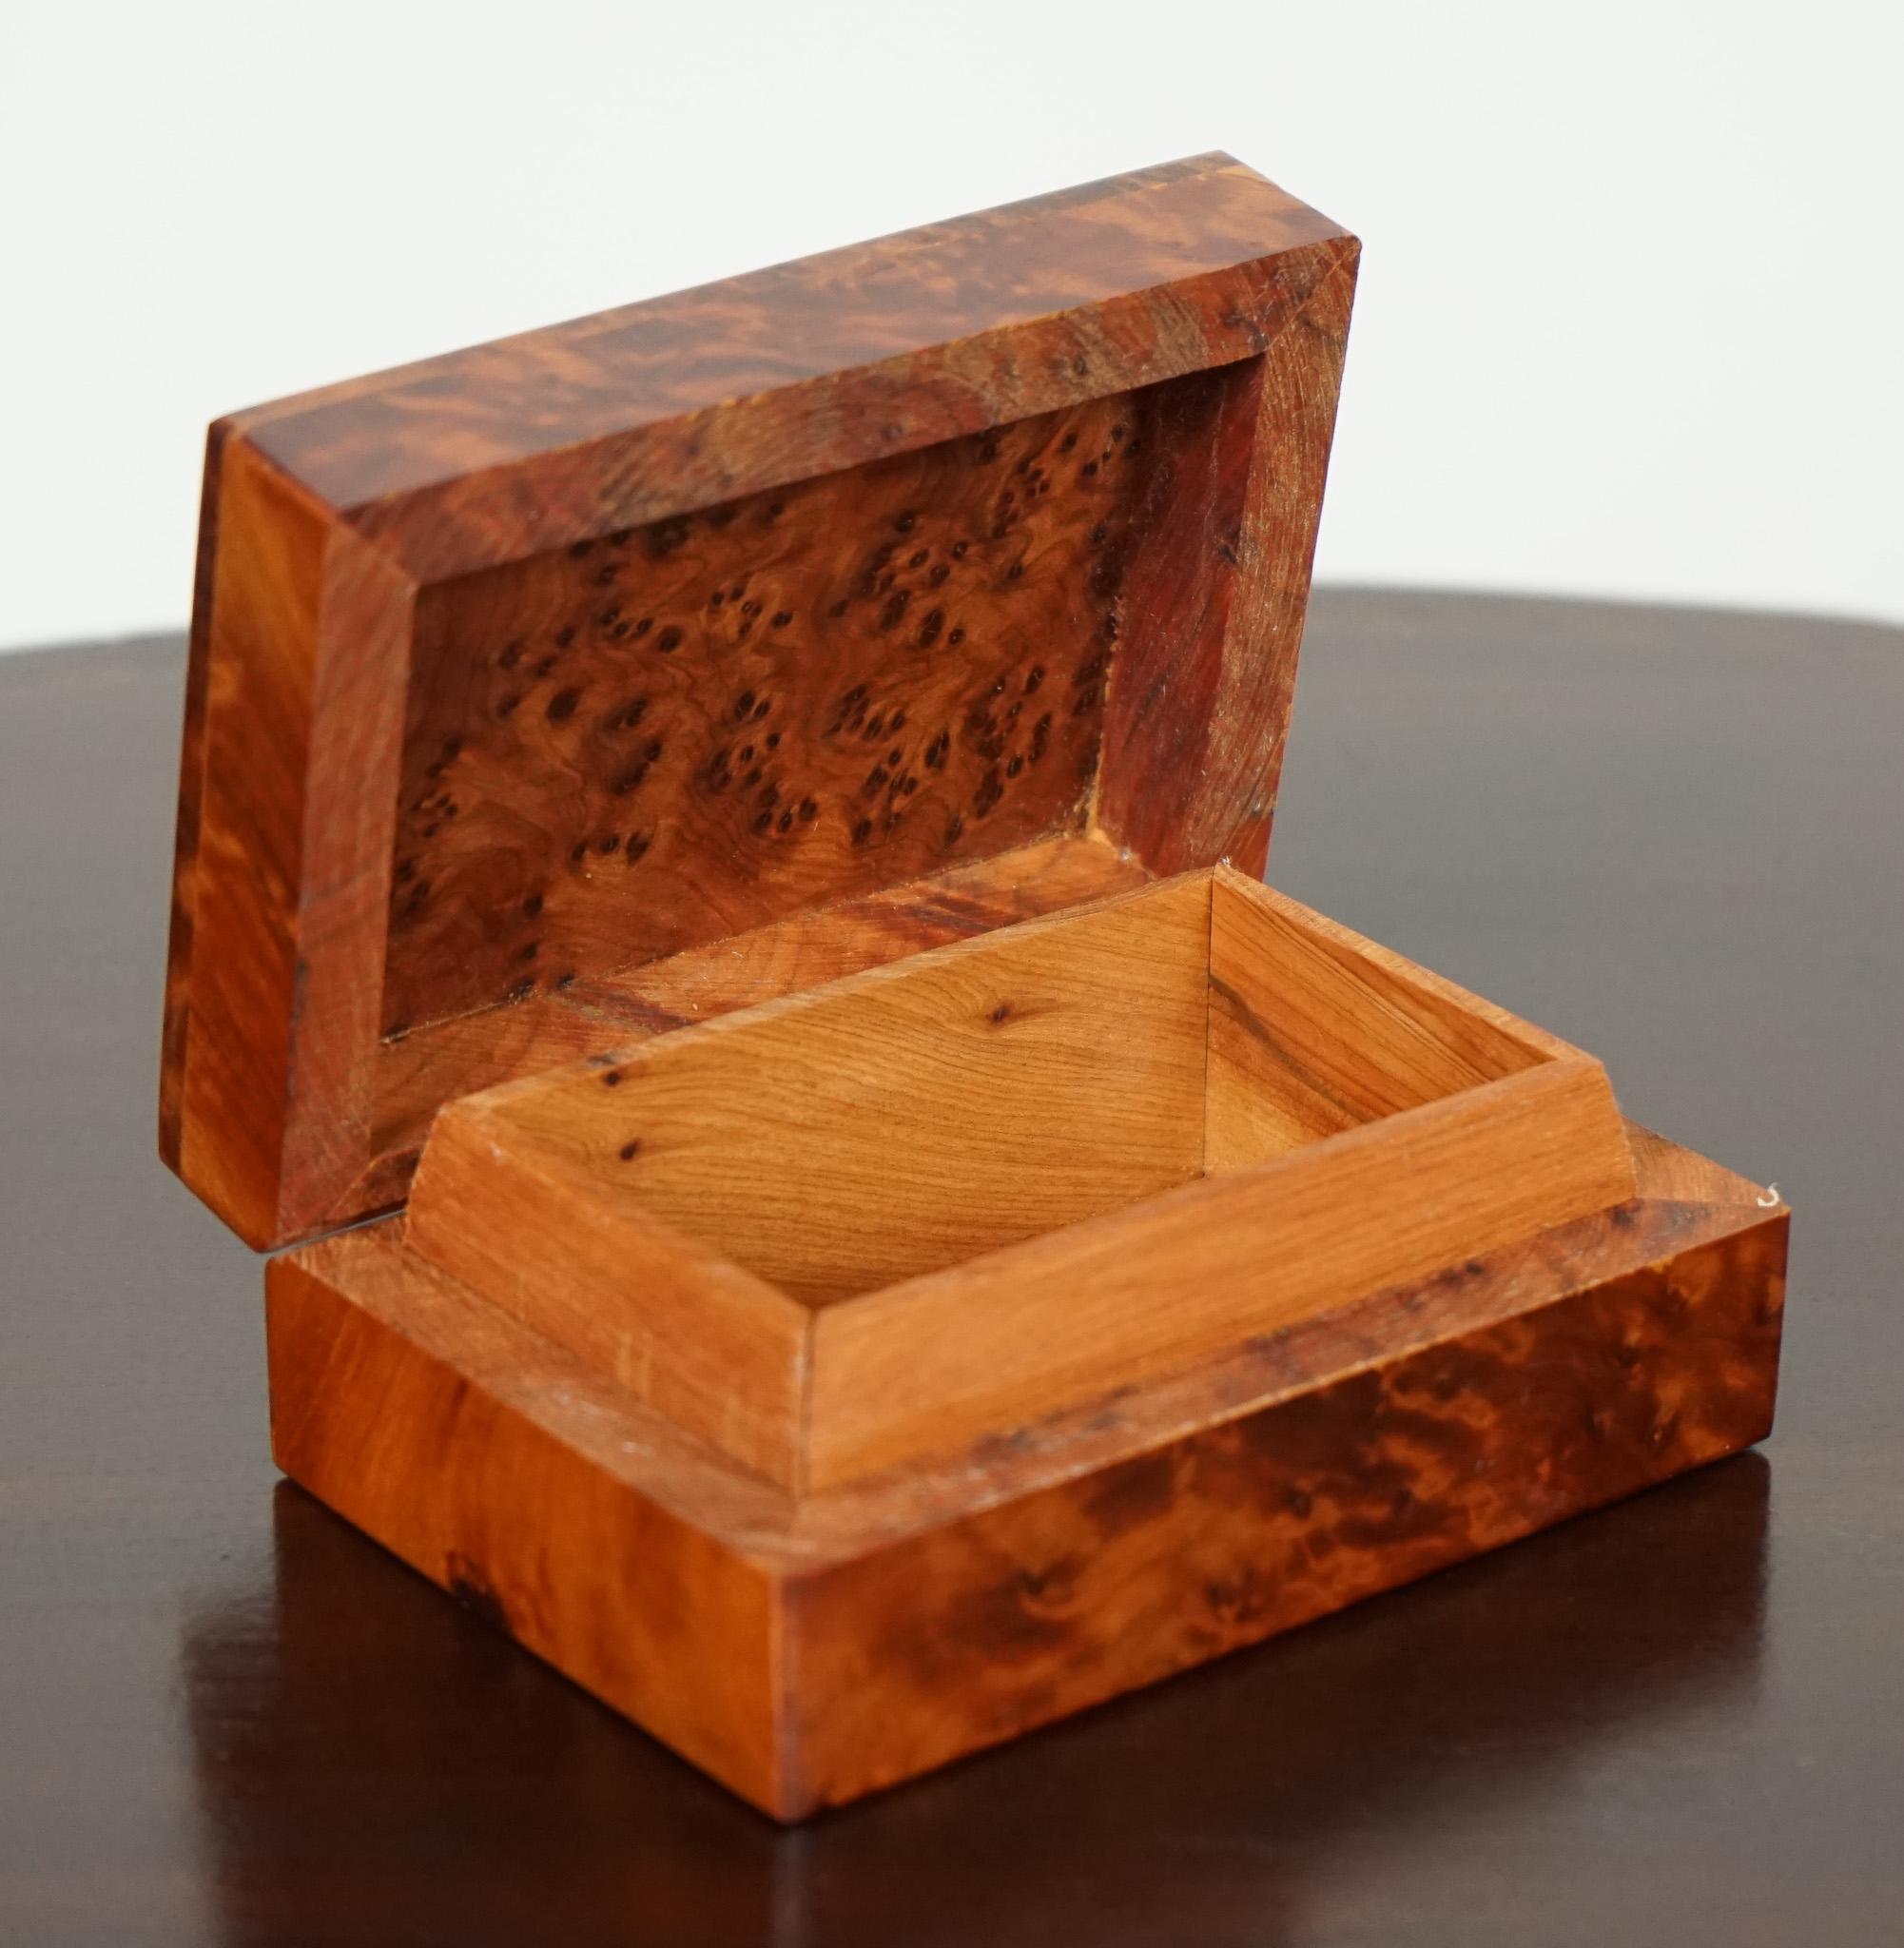 

We are delighted to offer for sale this Vintage Burl Wood Small Box.

A beautiful burl wood box with storage. 

Please carefully examine the pictures to see the condition before purchasing, as they form part of the description. If you have any